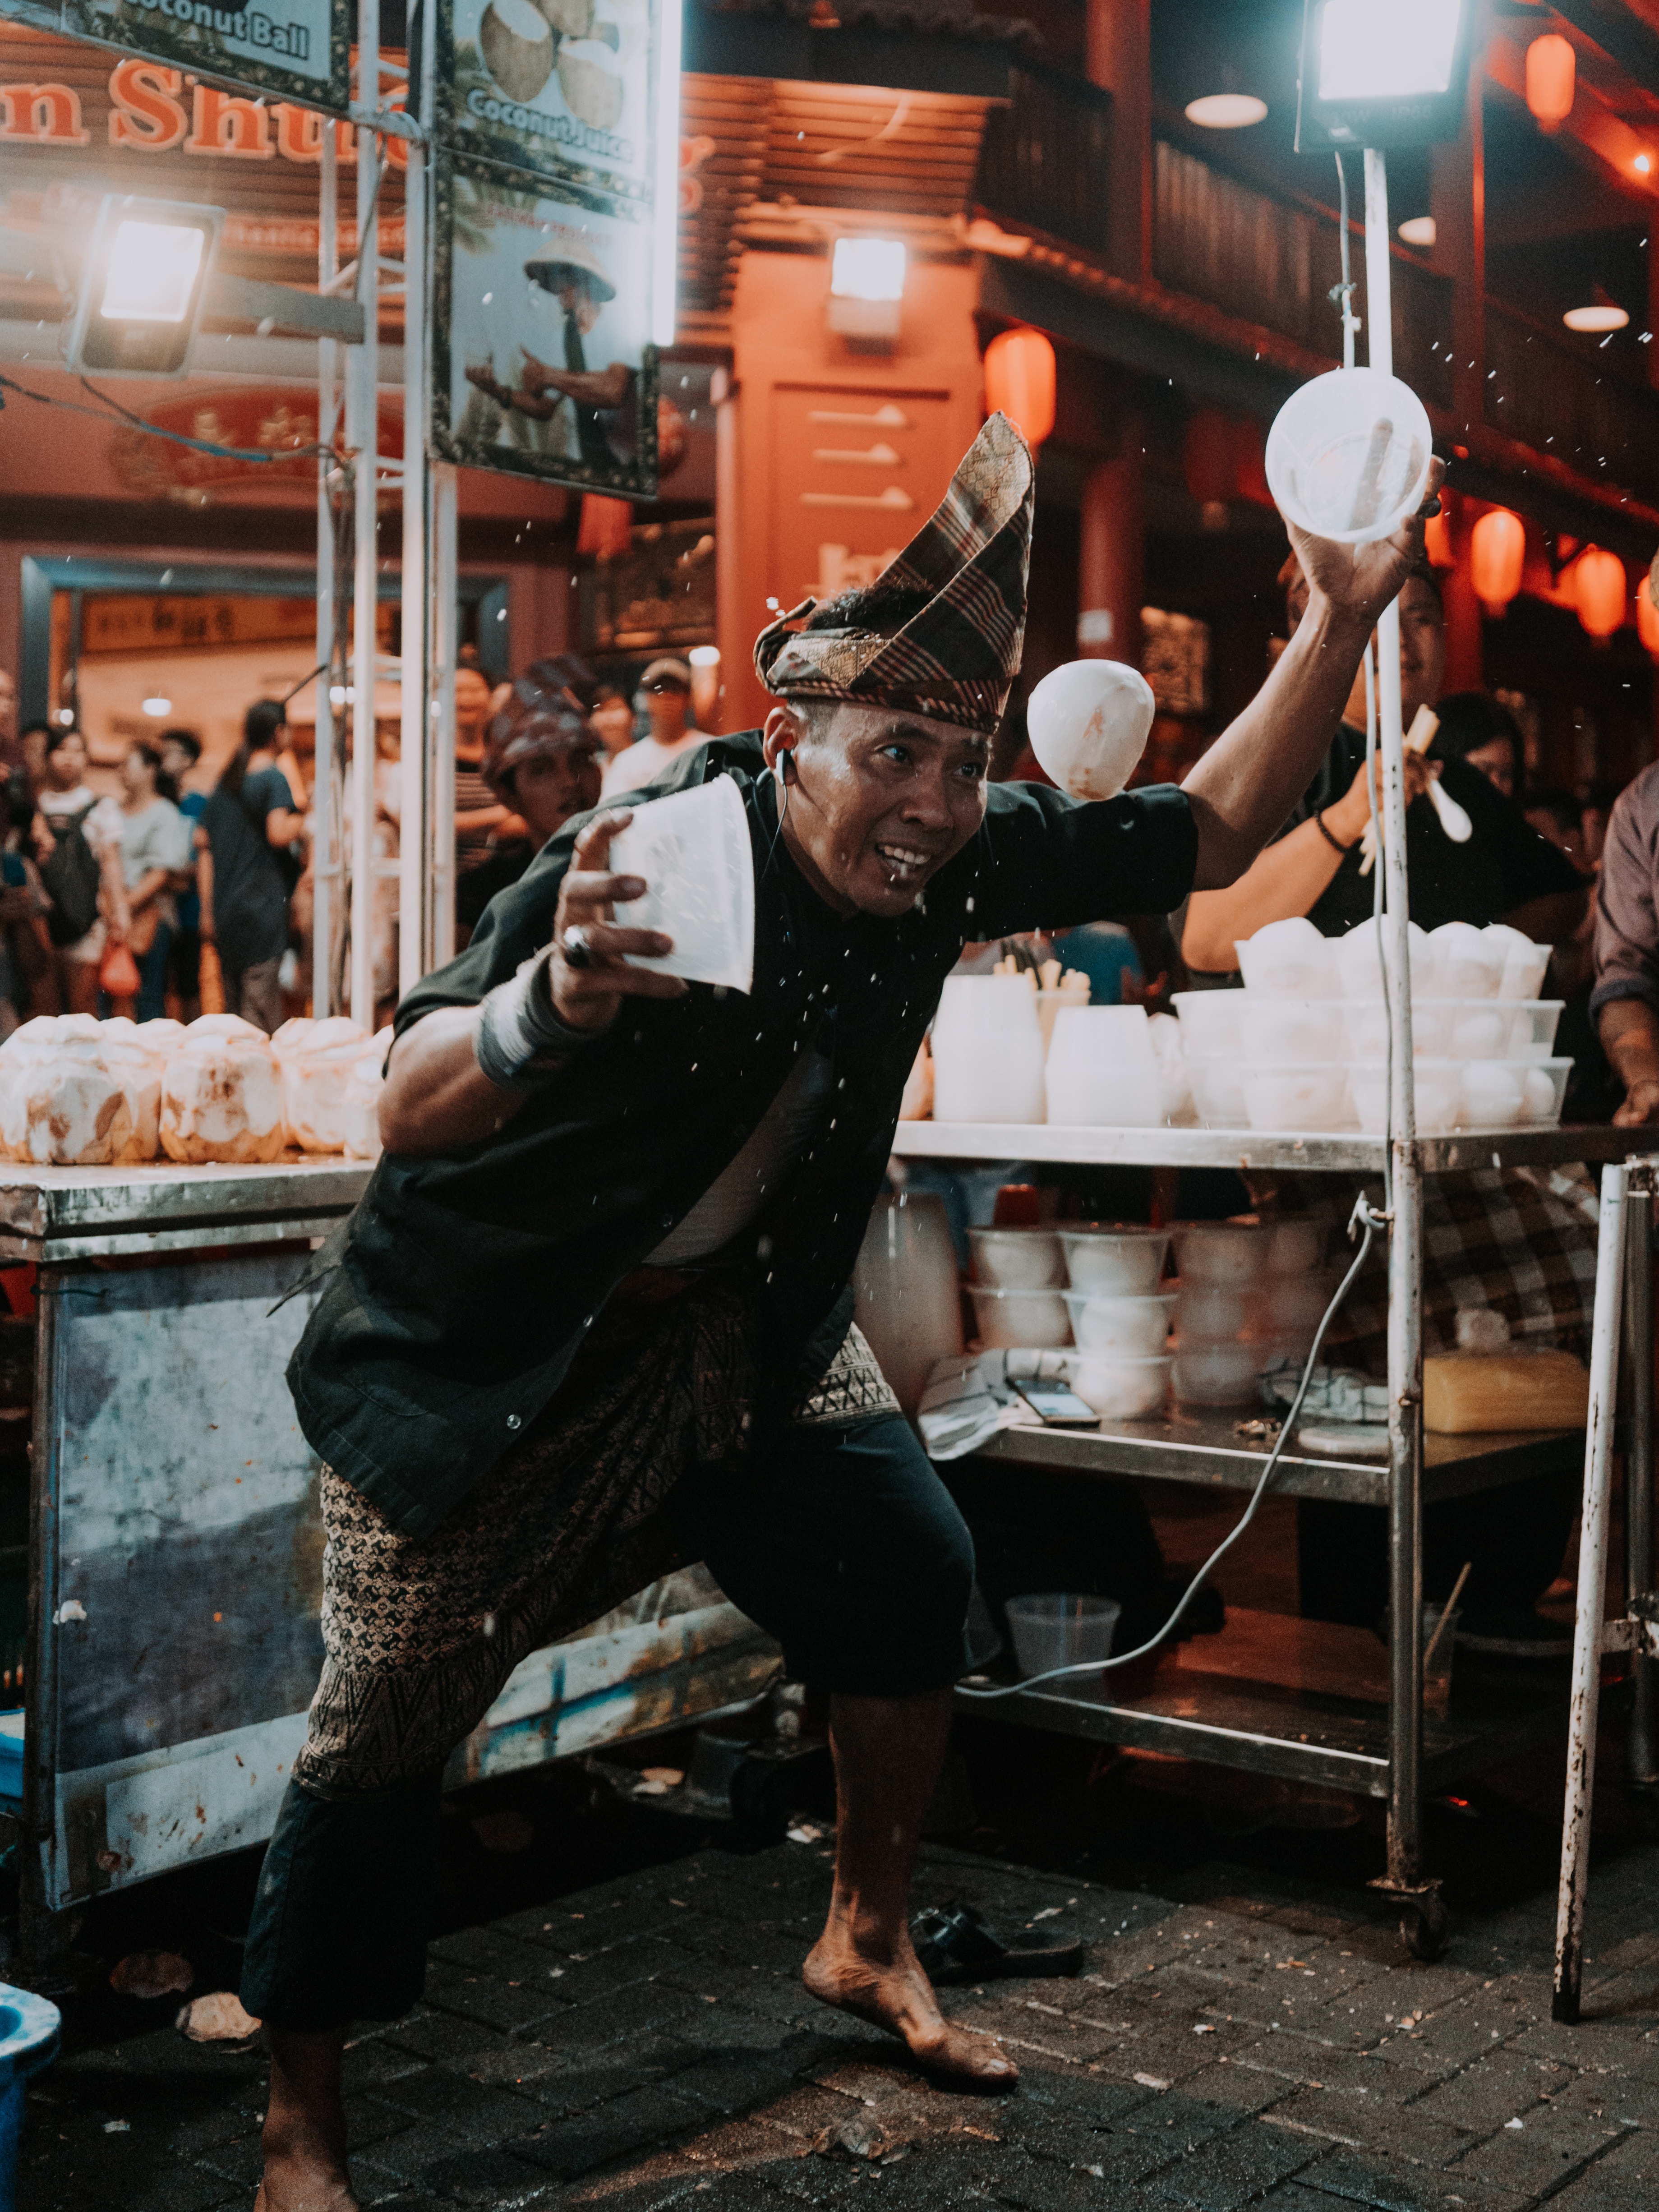 A barefoot street food vendor wearing a pointed hat and juggling ice between two bowls.